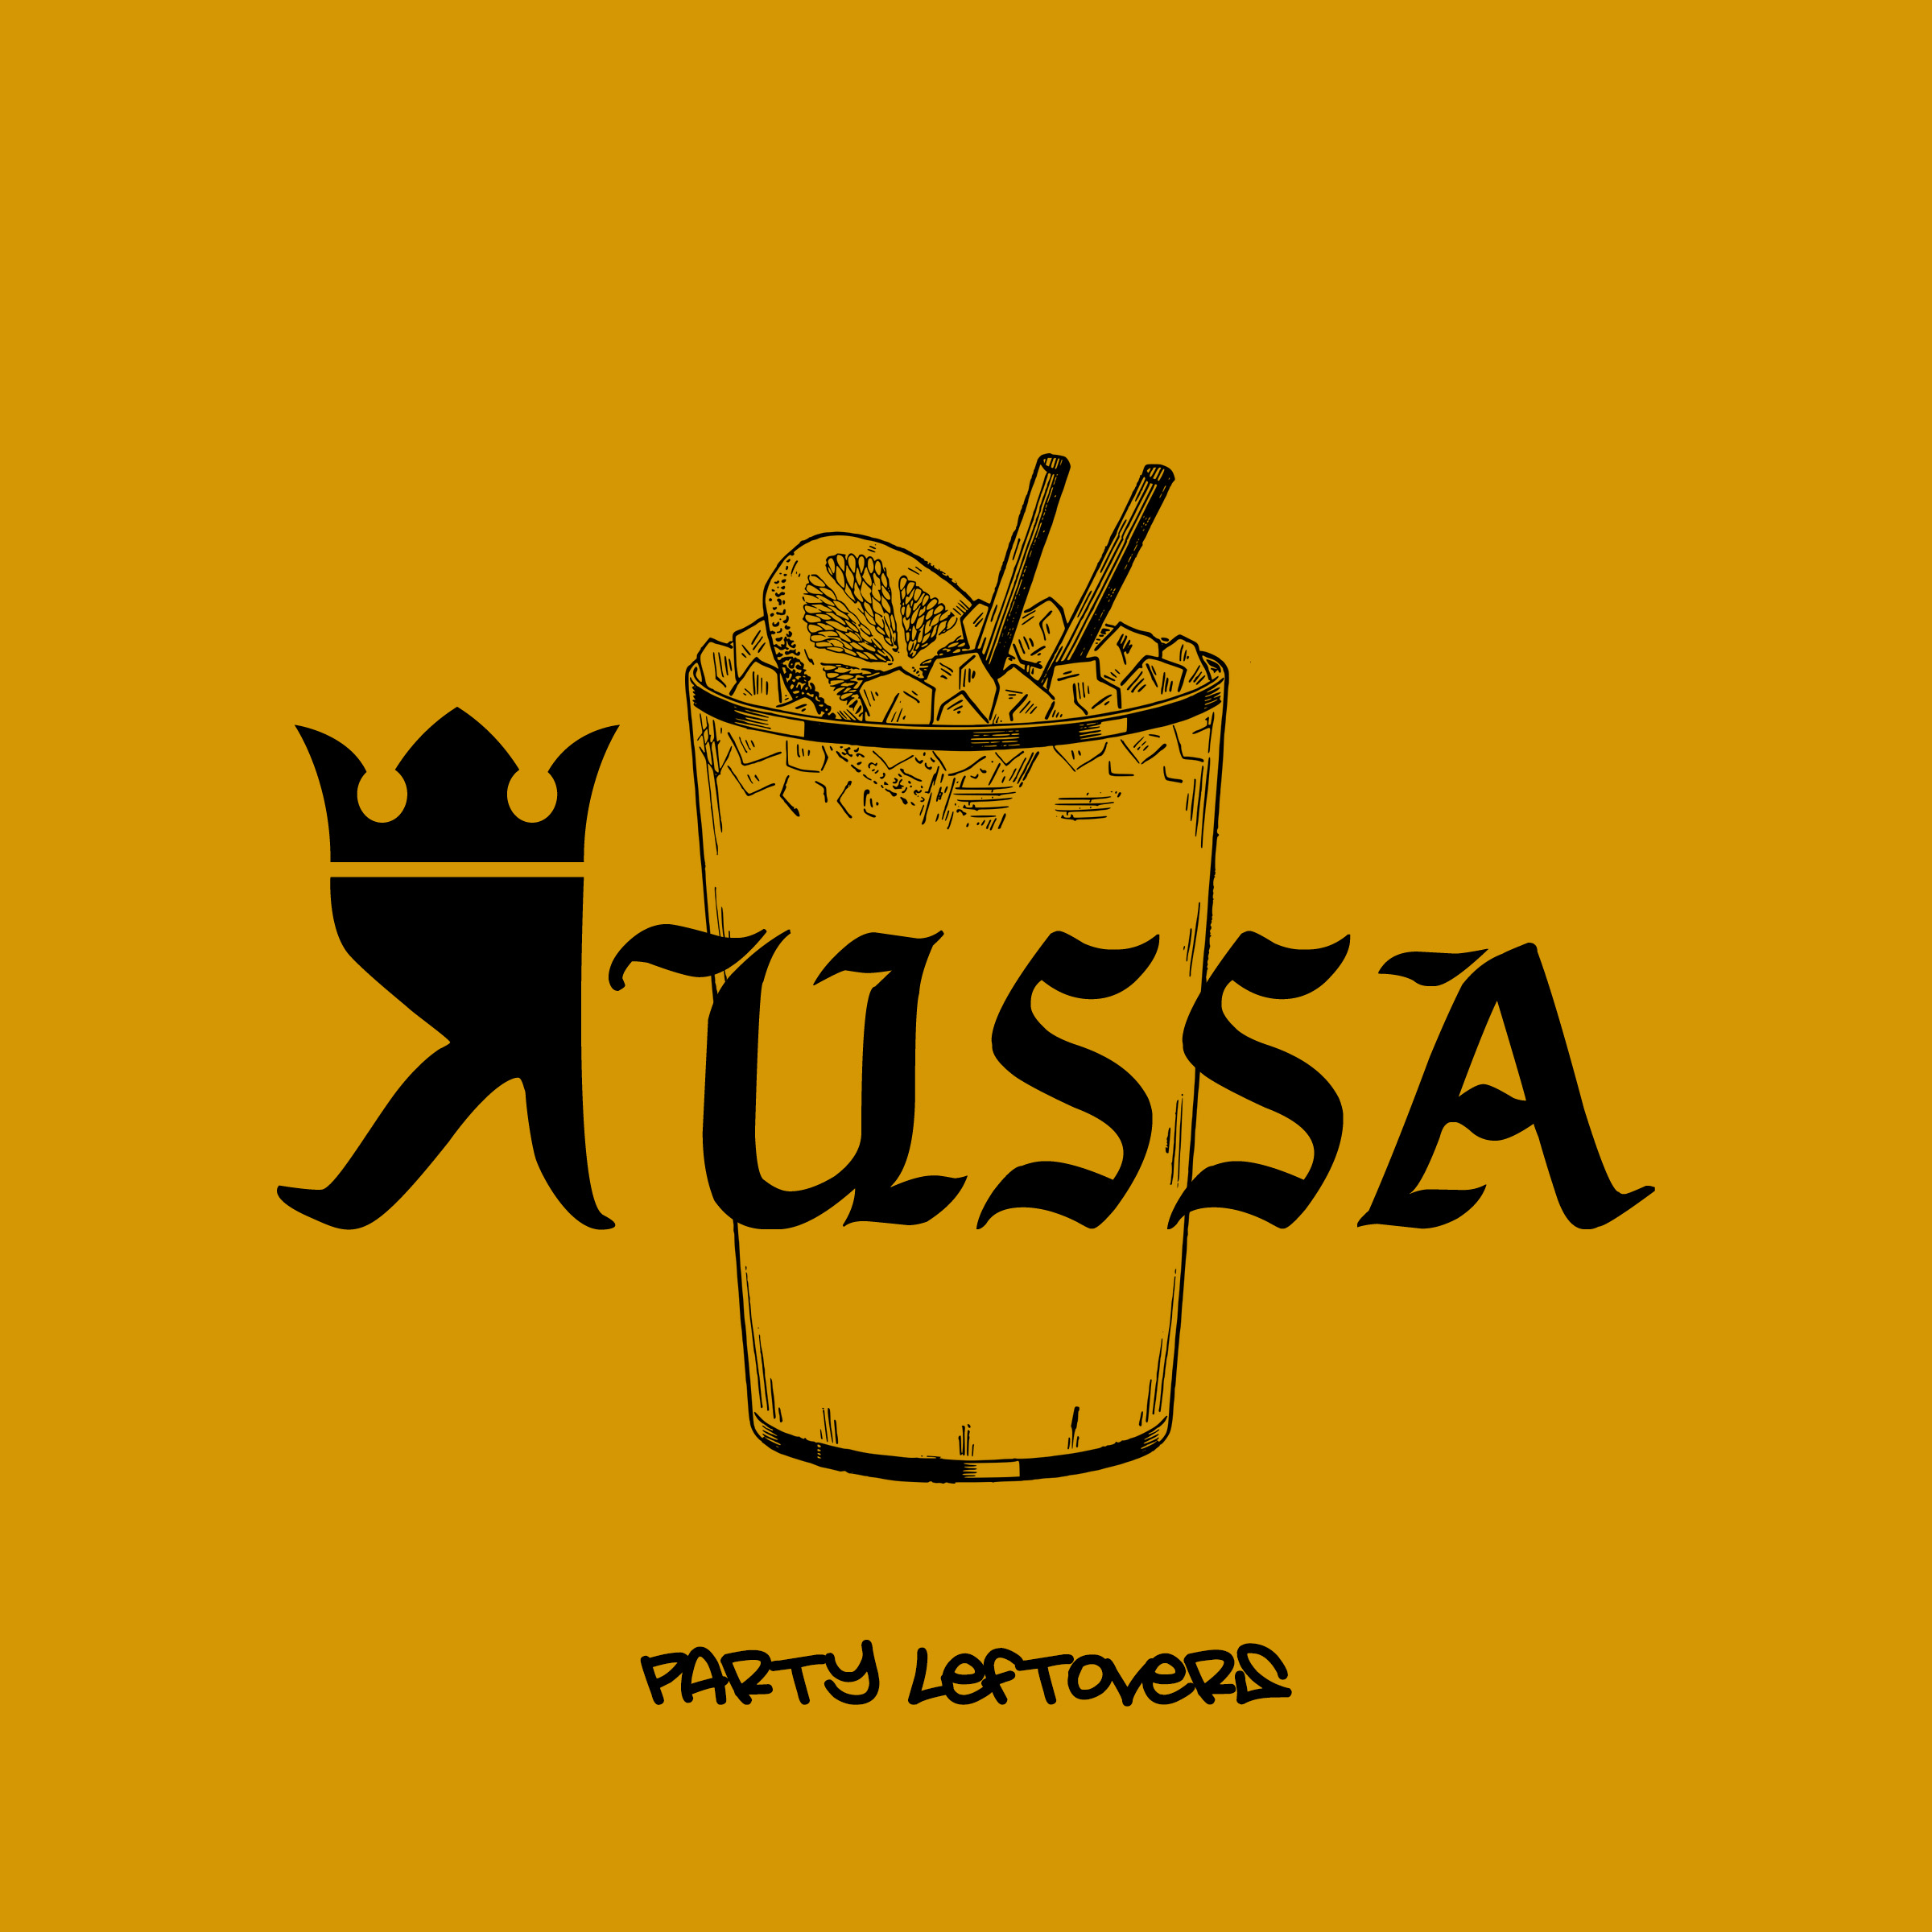 14. Russa - ep Party Leftovers